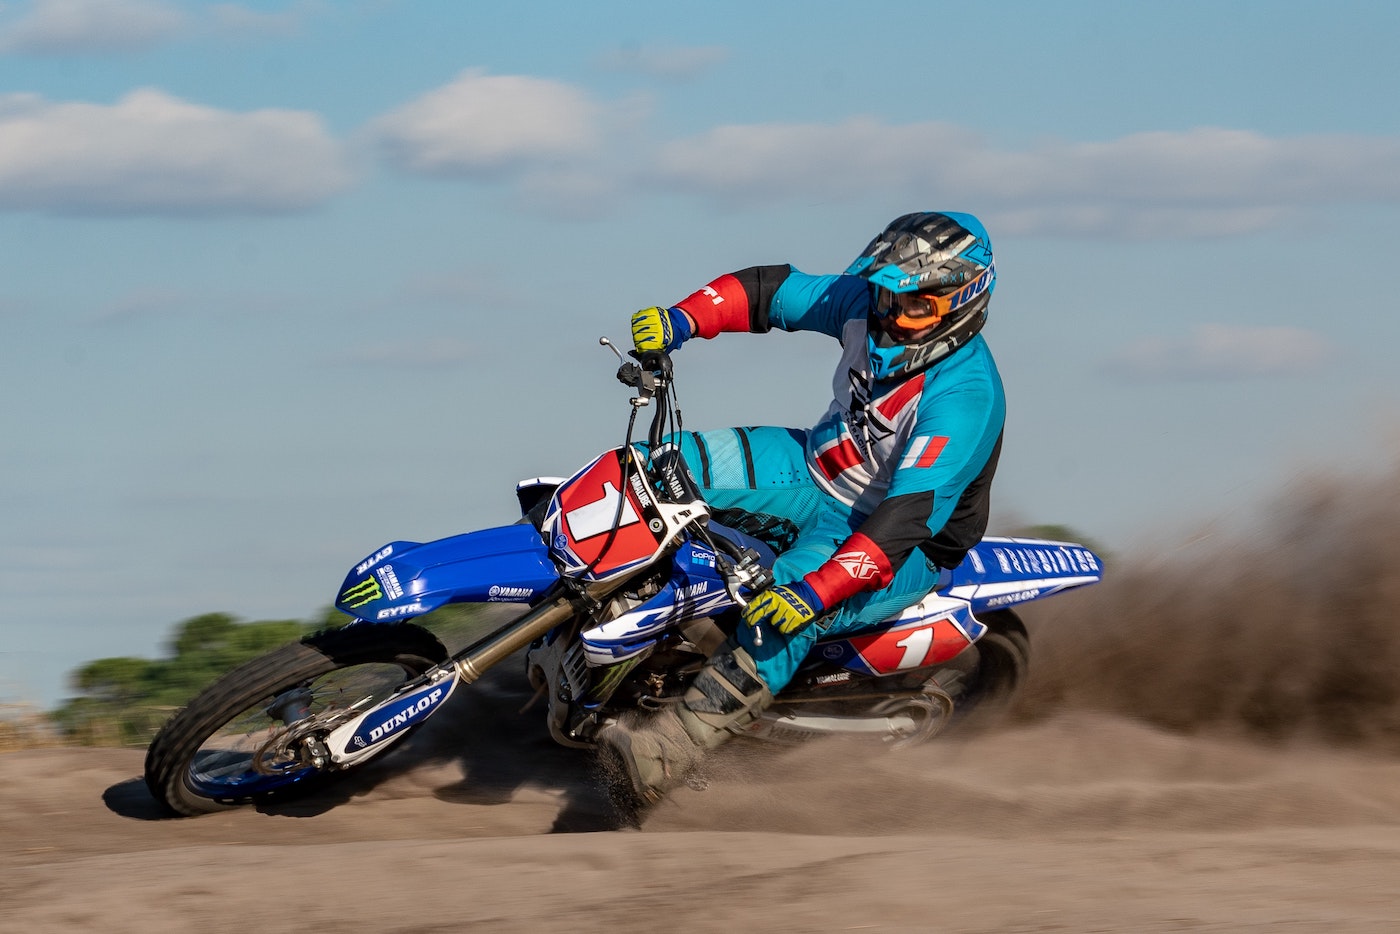 How Fast Does a Dirt Bike Go?